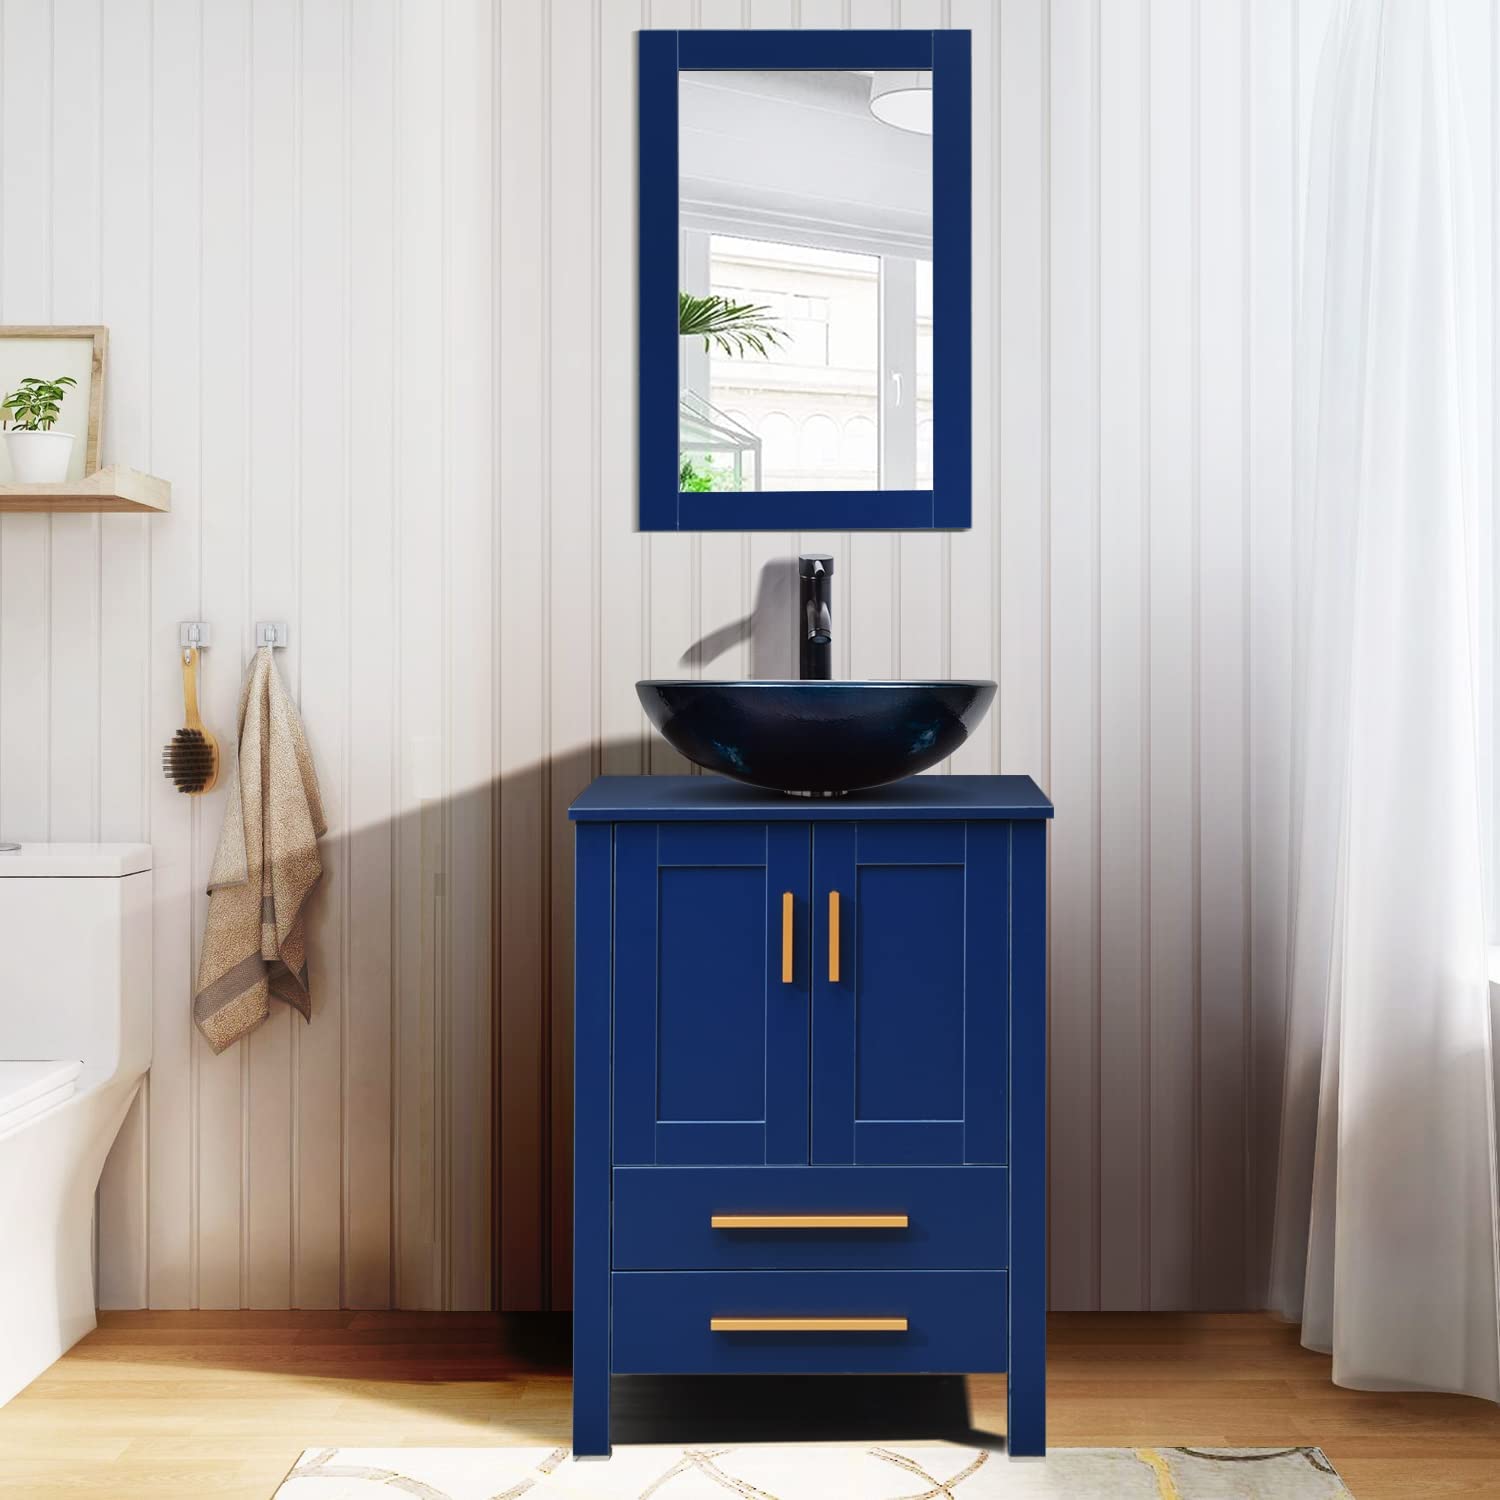 Elecwish vanity  with blue glass sink set stand pedestal cabinet with mirror